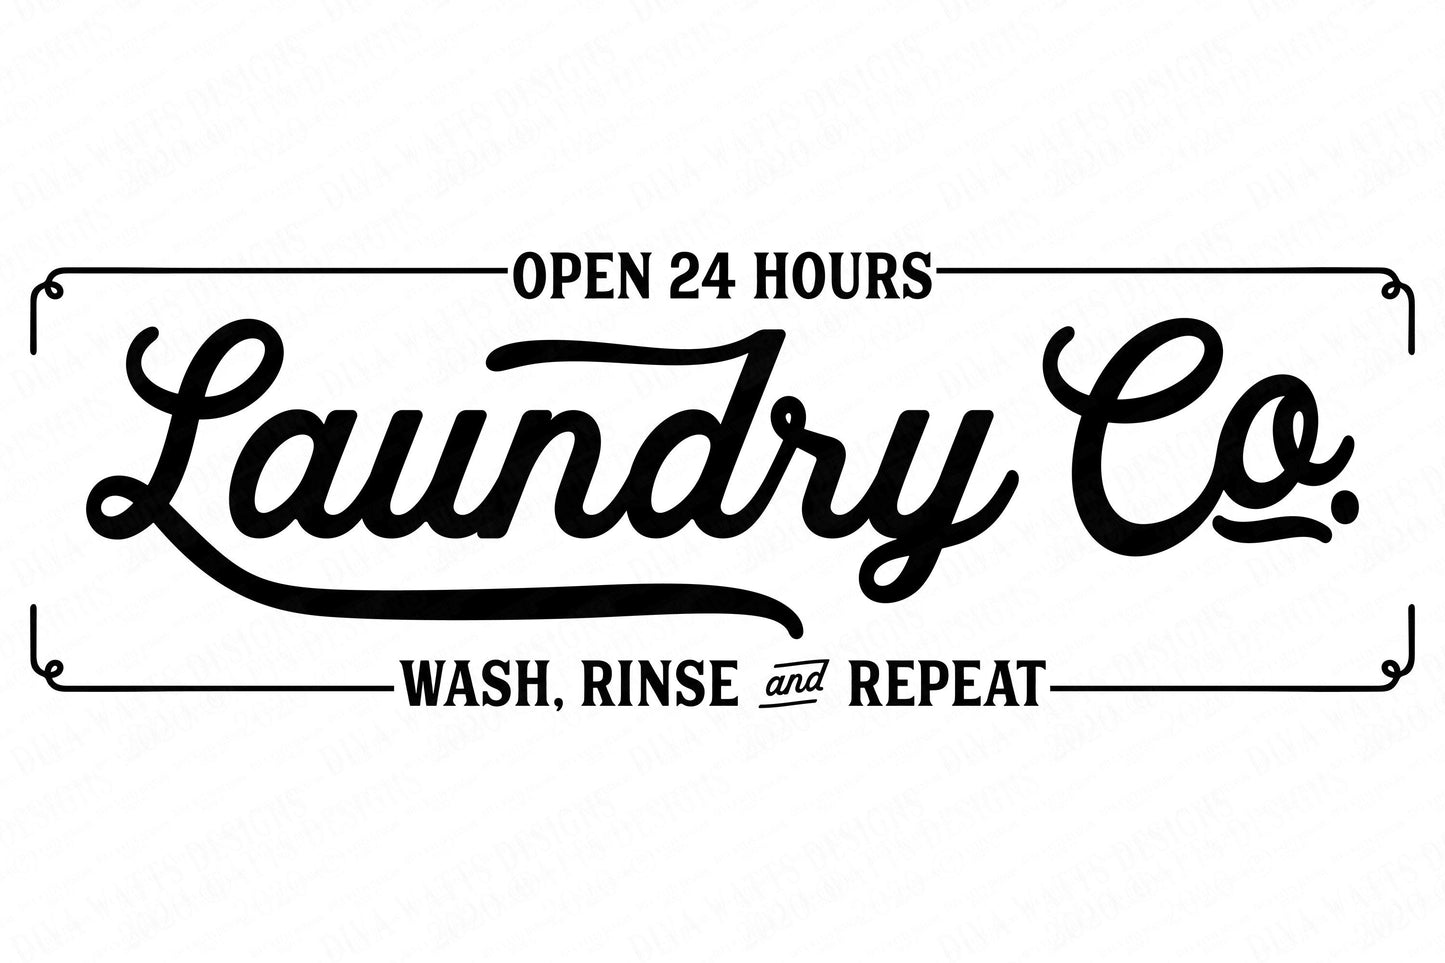 SVG Laundry Co. Open 24 Hours Wash Rinse And Repeat | Cutting File | Farmhouse Sign | DXF eps | Rustic Vintage Laundry Room | Vinyl Stencil